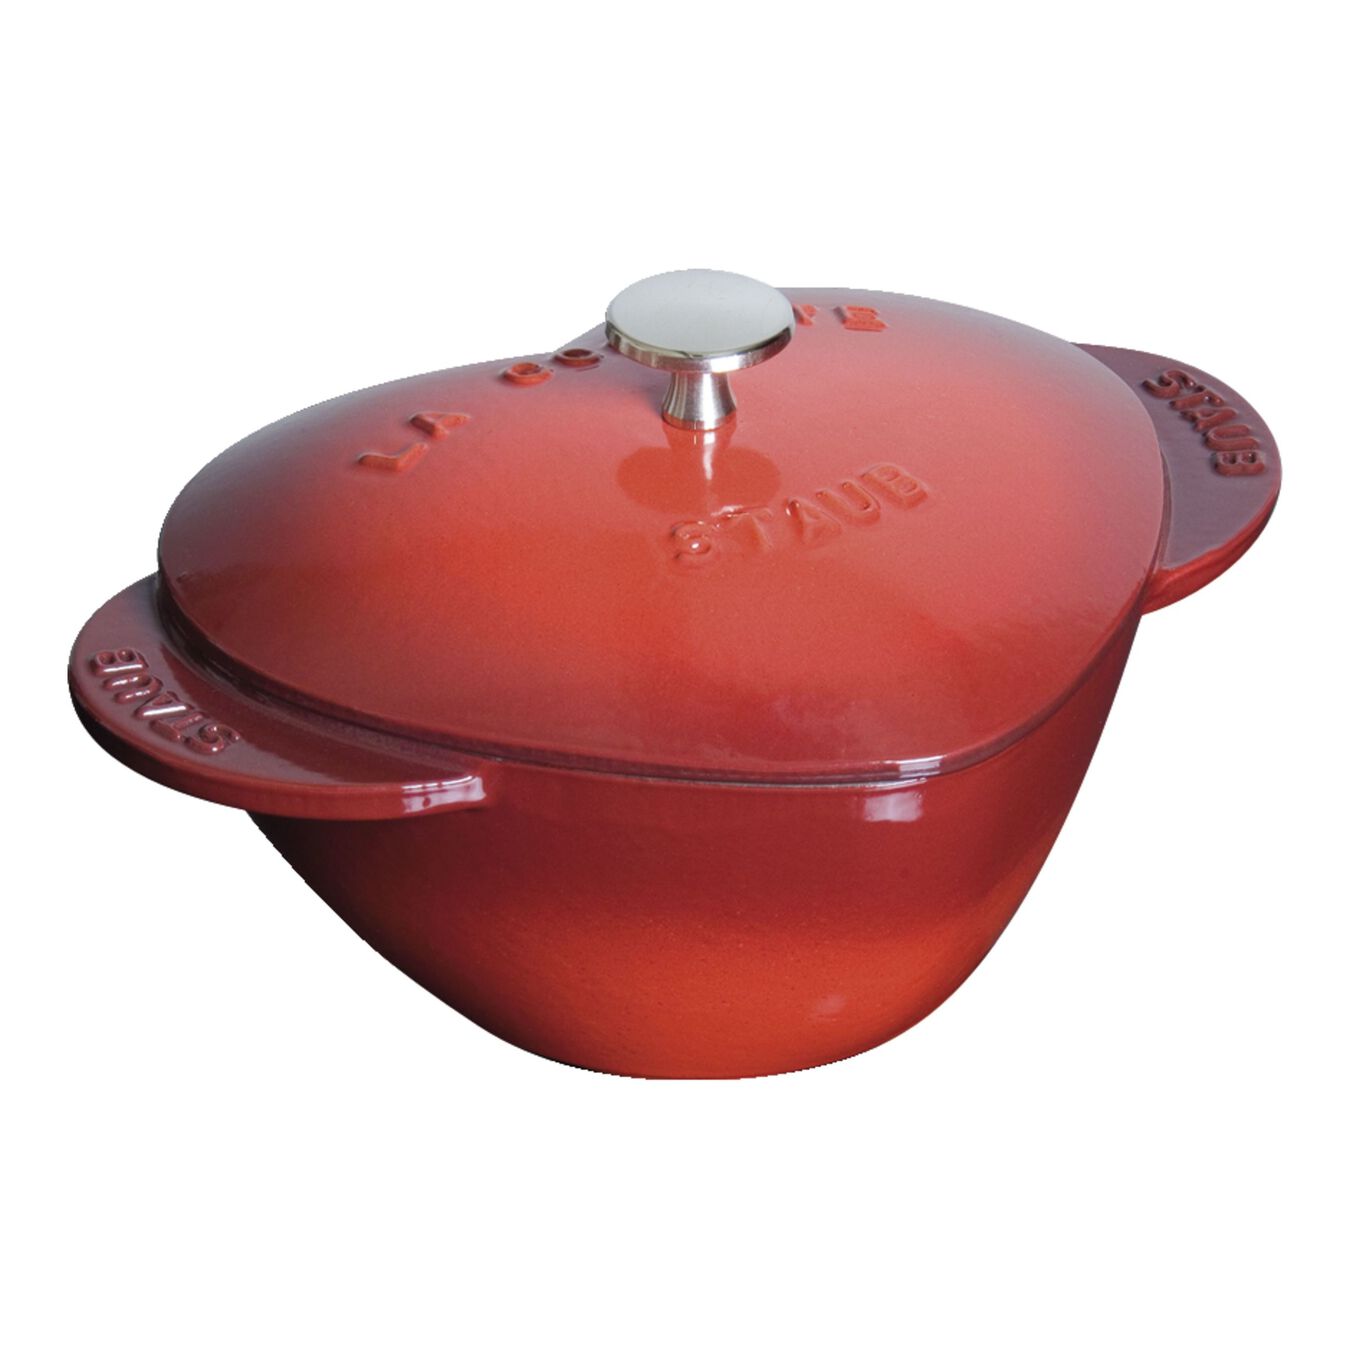 Cocotte 20 cm, Herz, Kirsch-Rot, Gusseisen,,large 1